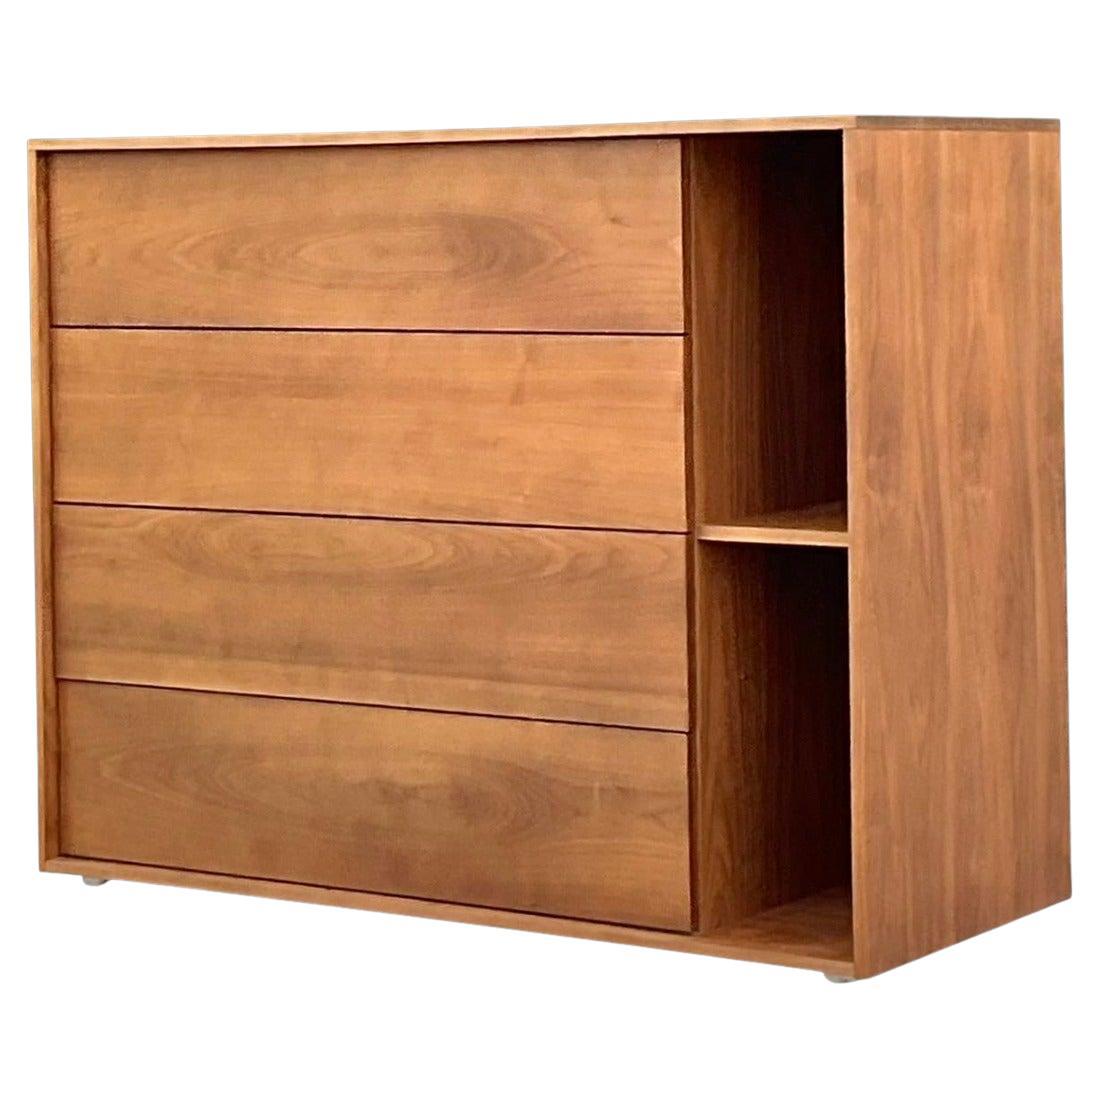 Contemporary Dwr Parallel Dresser For Sale